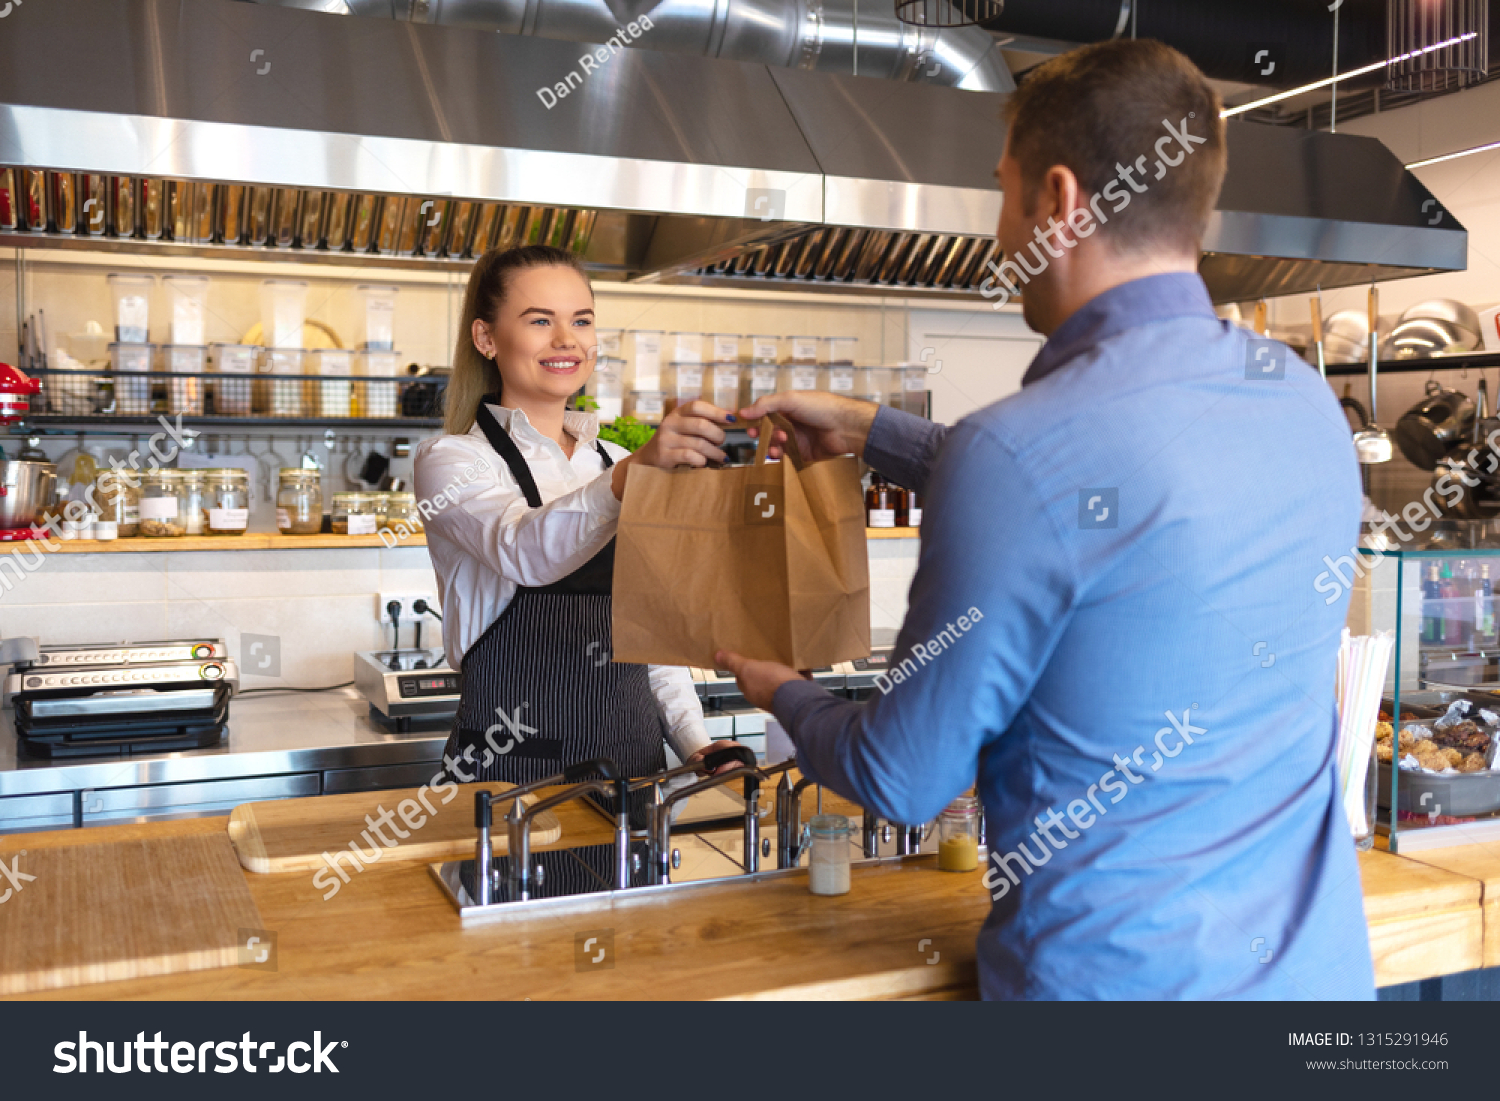 Cheerful waitress wearing apron serving customer at counter in restaurant - Small business and service concept with young business owner woman giving bag with takeaway food to client #1315291946